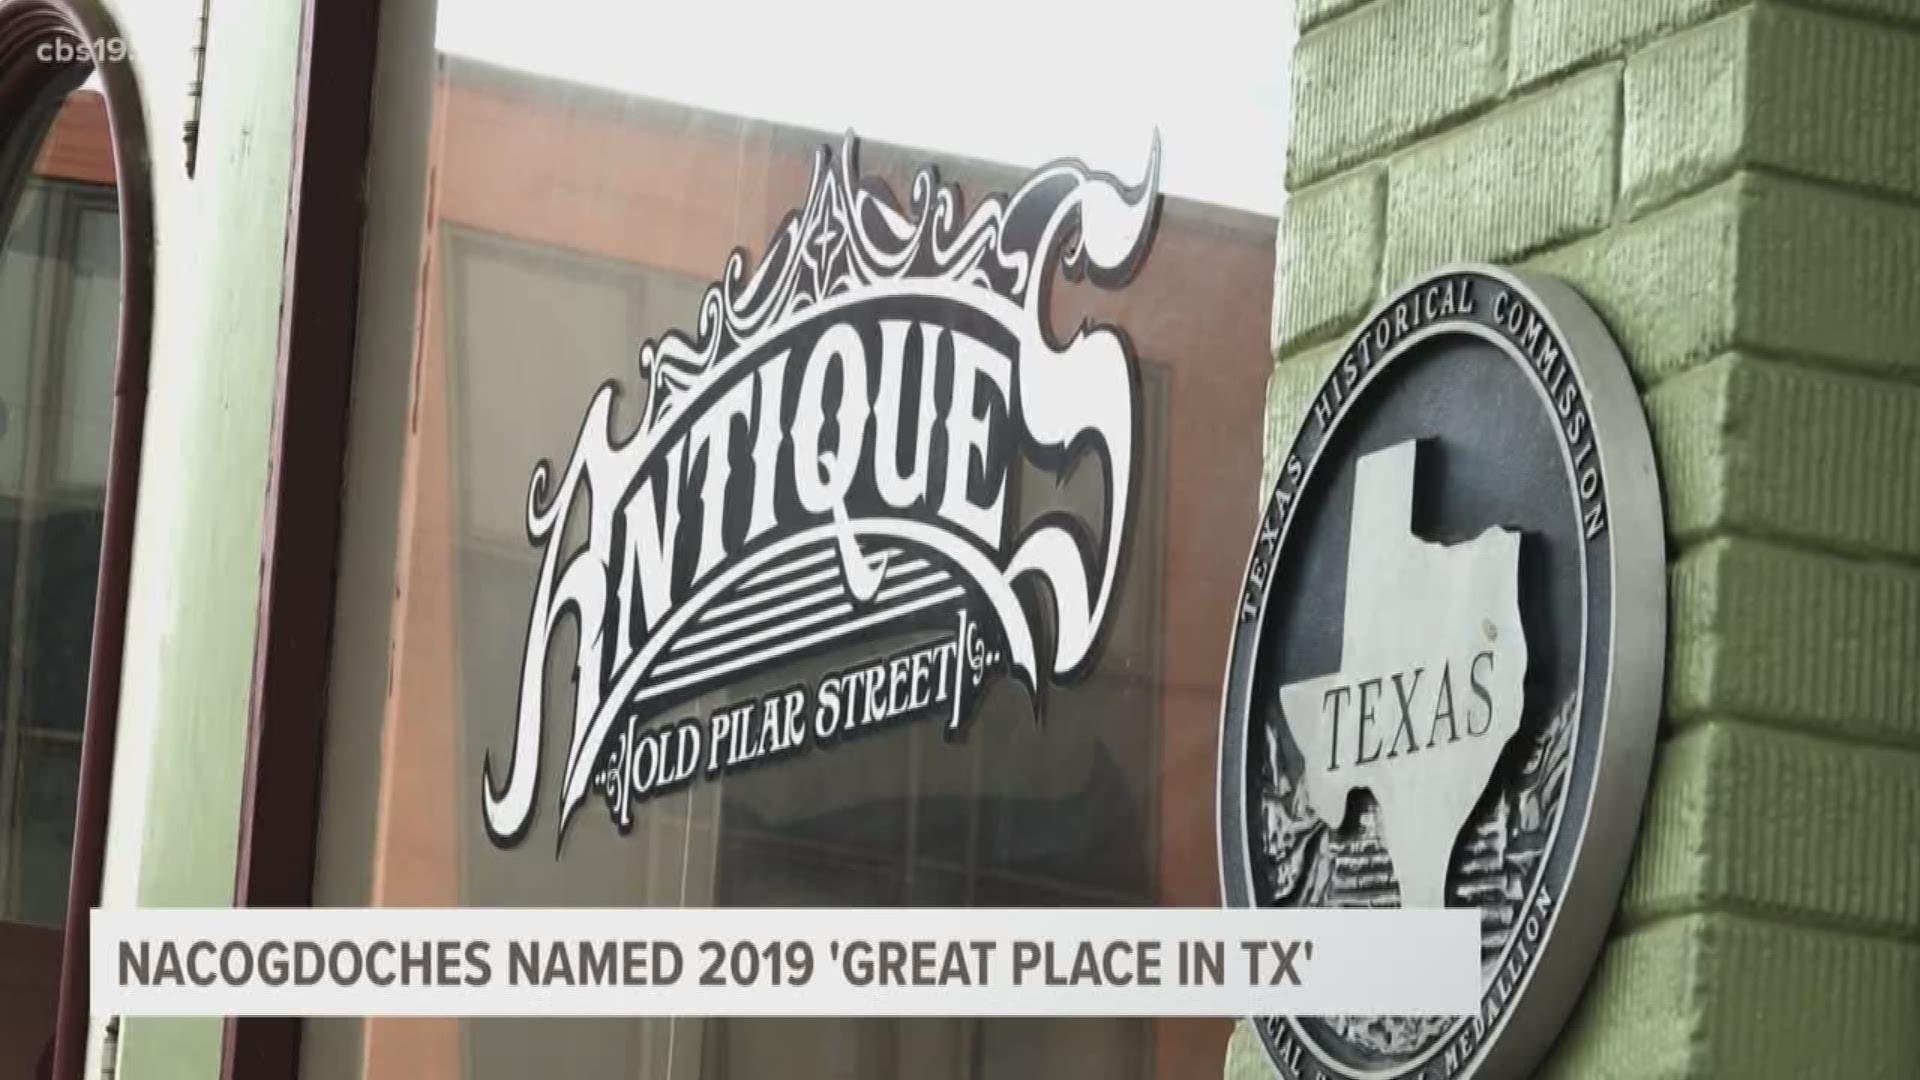 The Texas Chapter of the American Planning Association released the 2019 list of 'Great Places in Texas,' which includes Nacogdoches.